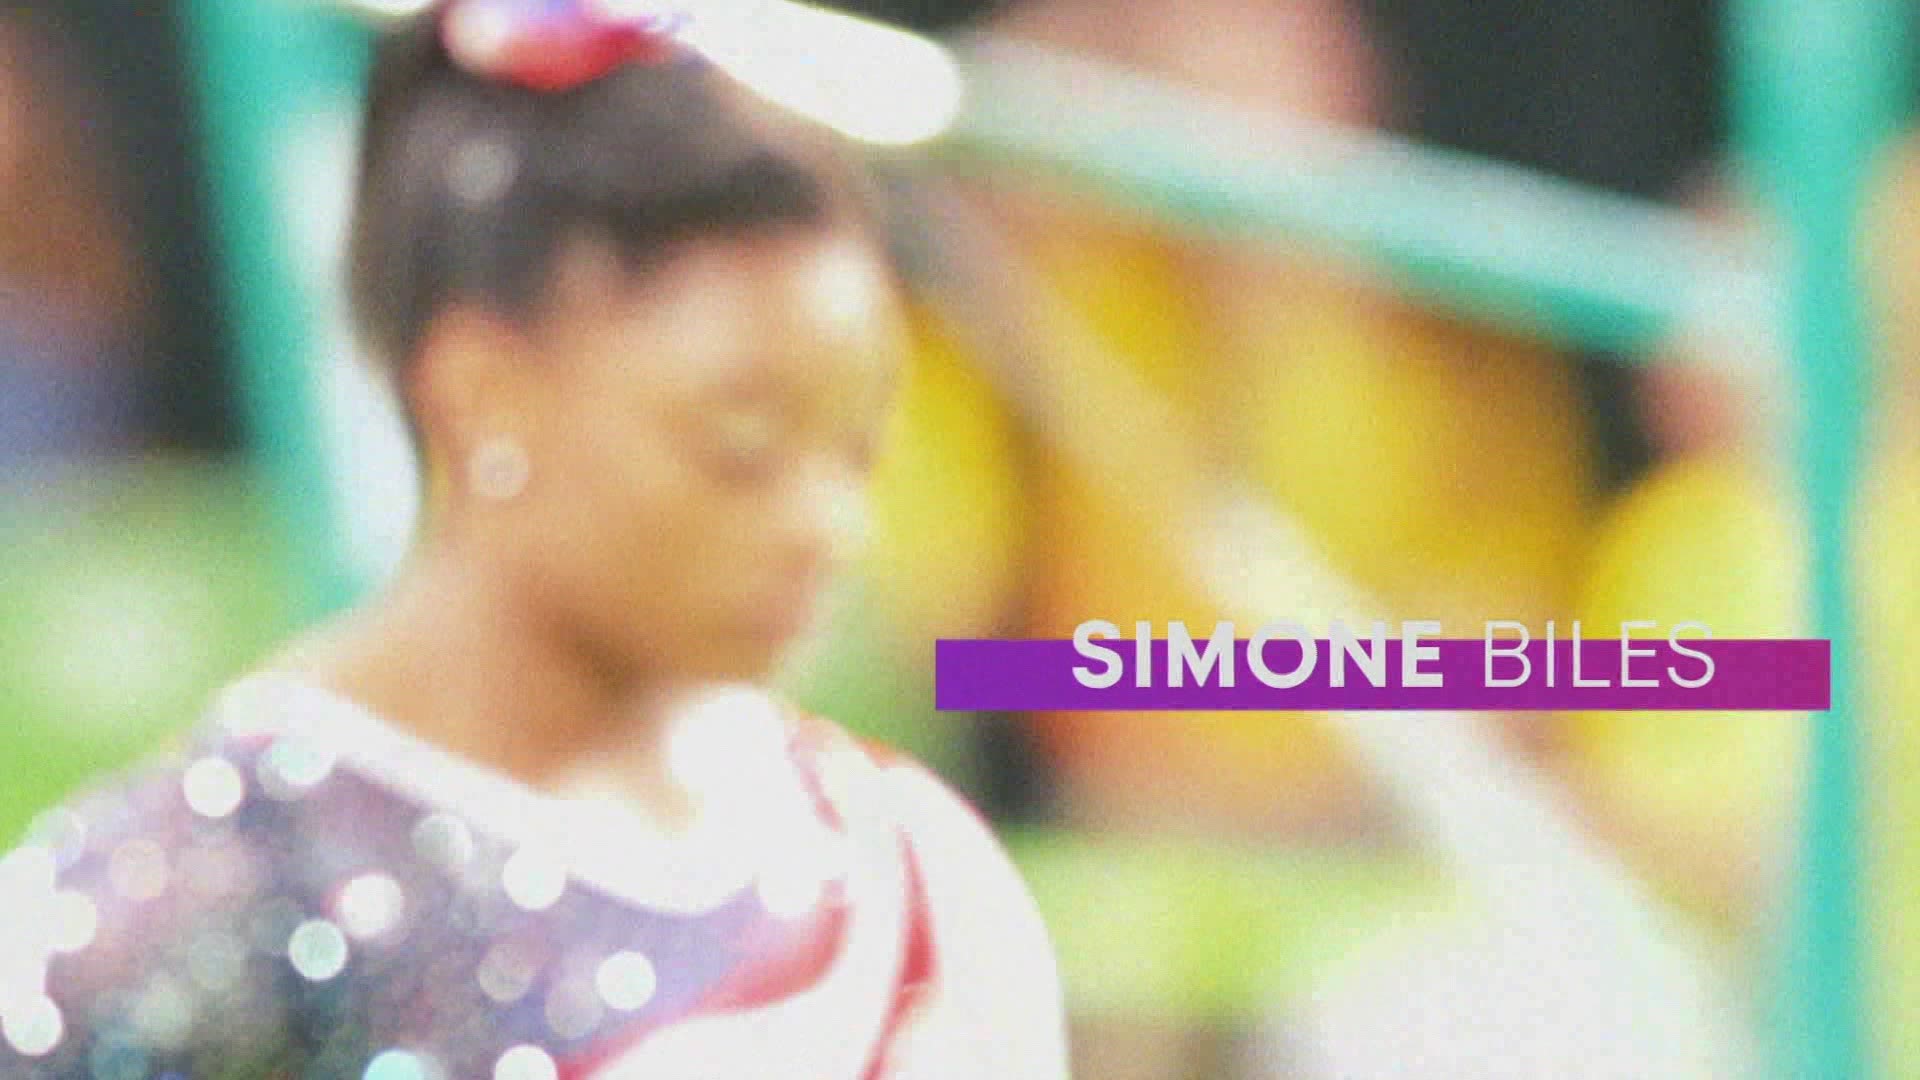 Simone Biles and the rest of the US gymnasts are ready for the Tokyo Olympics, which kick off July 23.